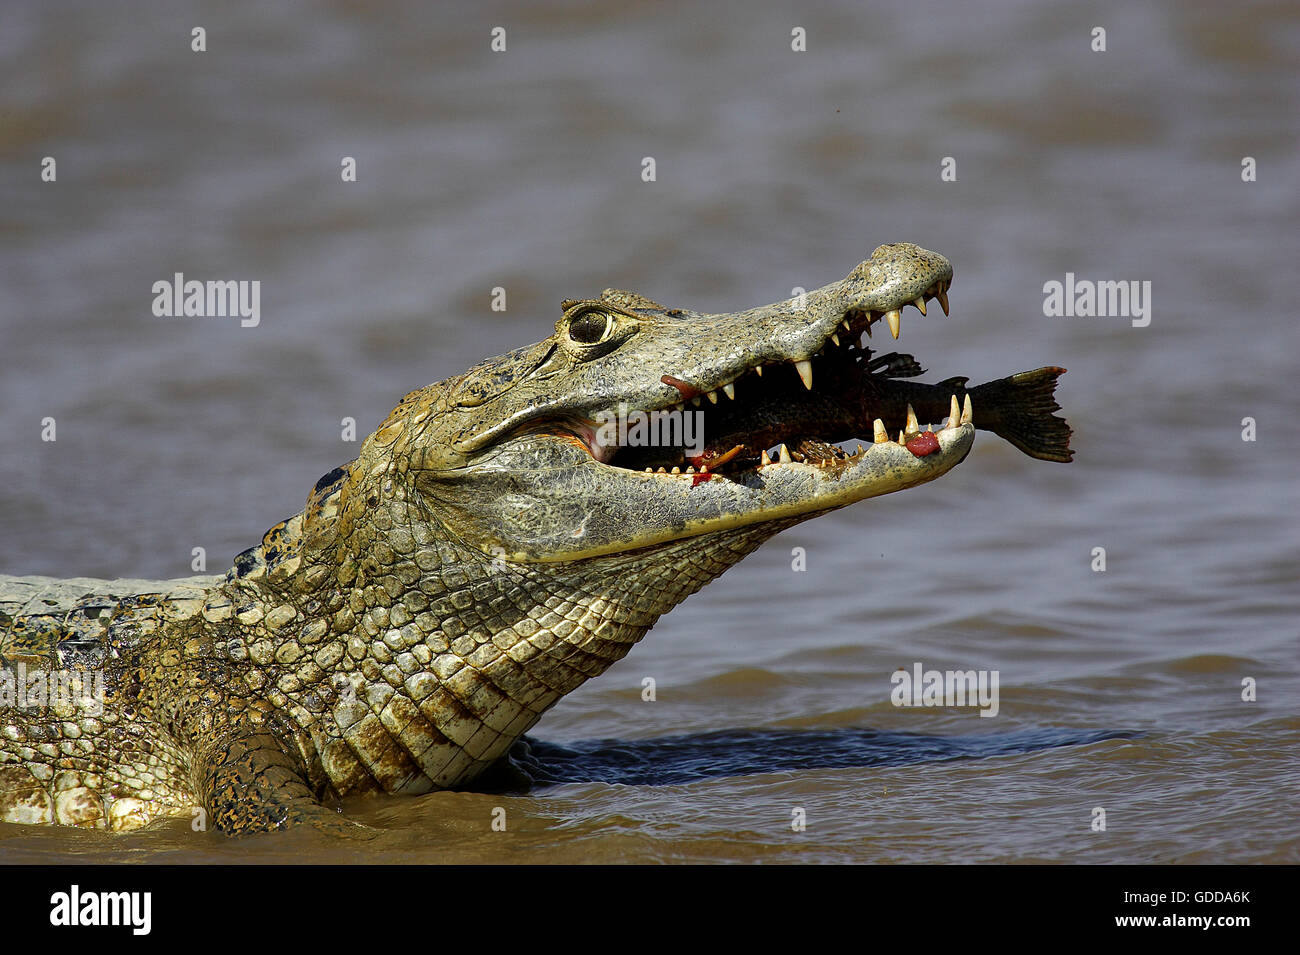 Spectacled Caiman, caiman crocodilus, with a Fish in its Mouth, Los Lianos in Venezuela Stock Photo